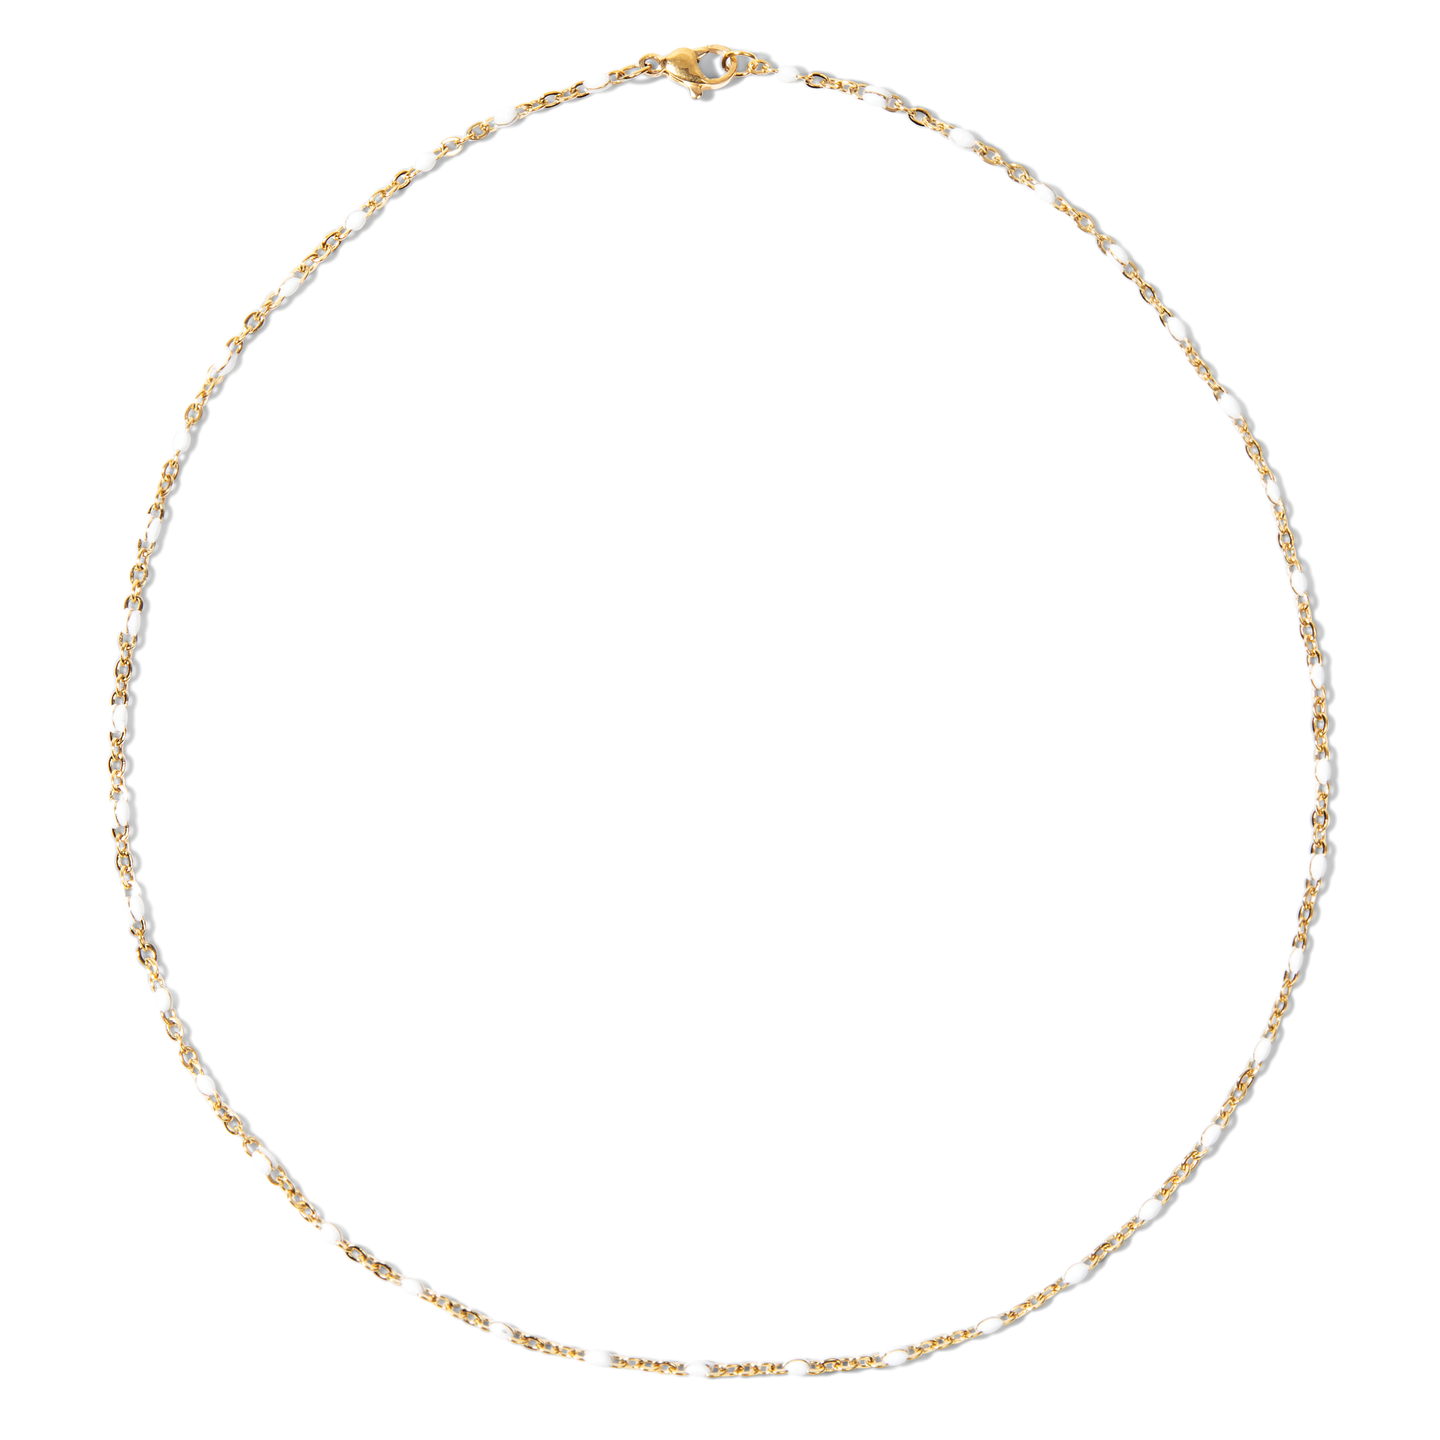 Ellie Vail - Marlow White Dainty Resin Beaded Necklace